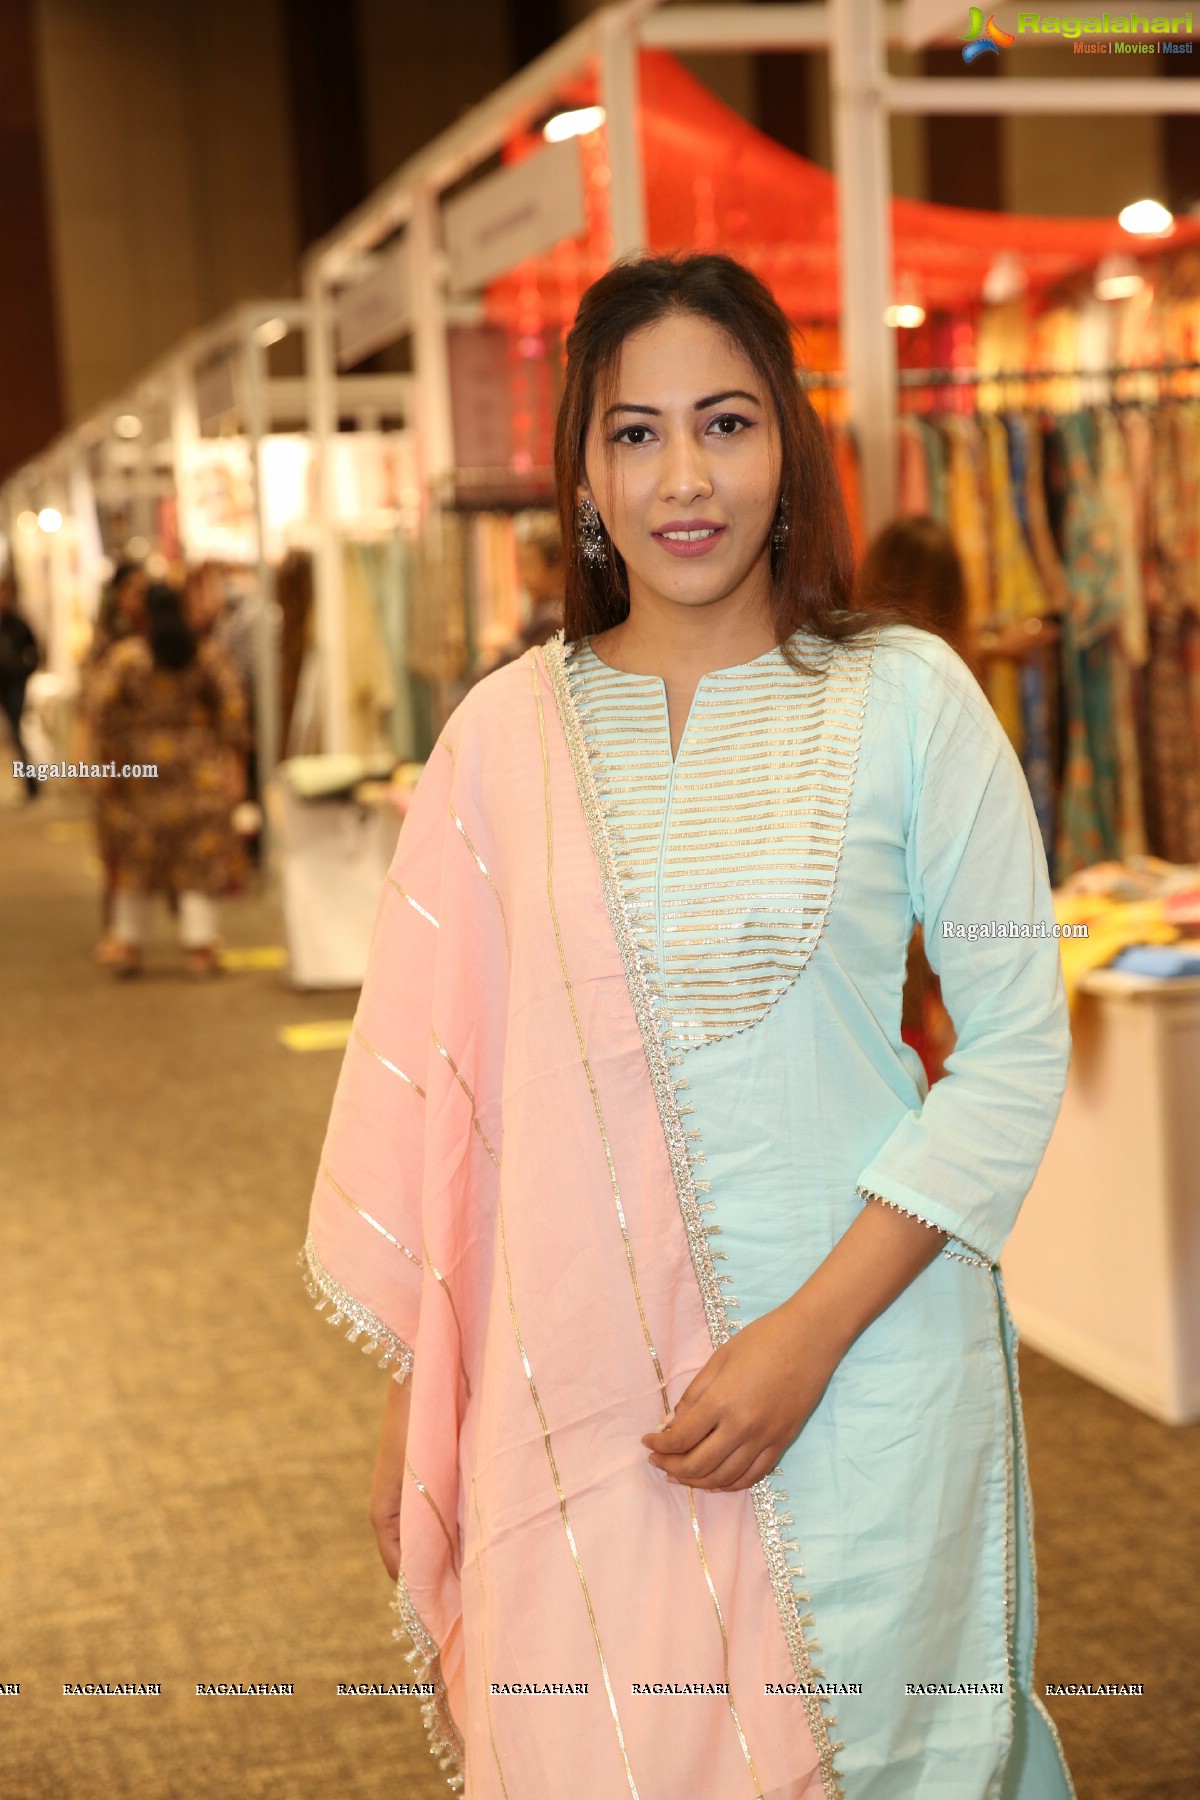 Design Library Exquisite Lifestyle Fashion Exhibition at HICC-Novotel